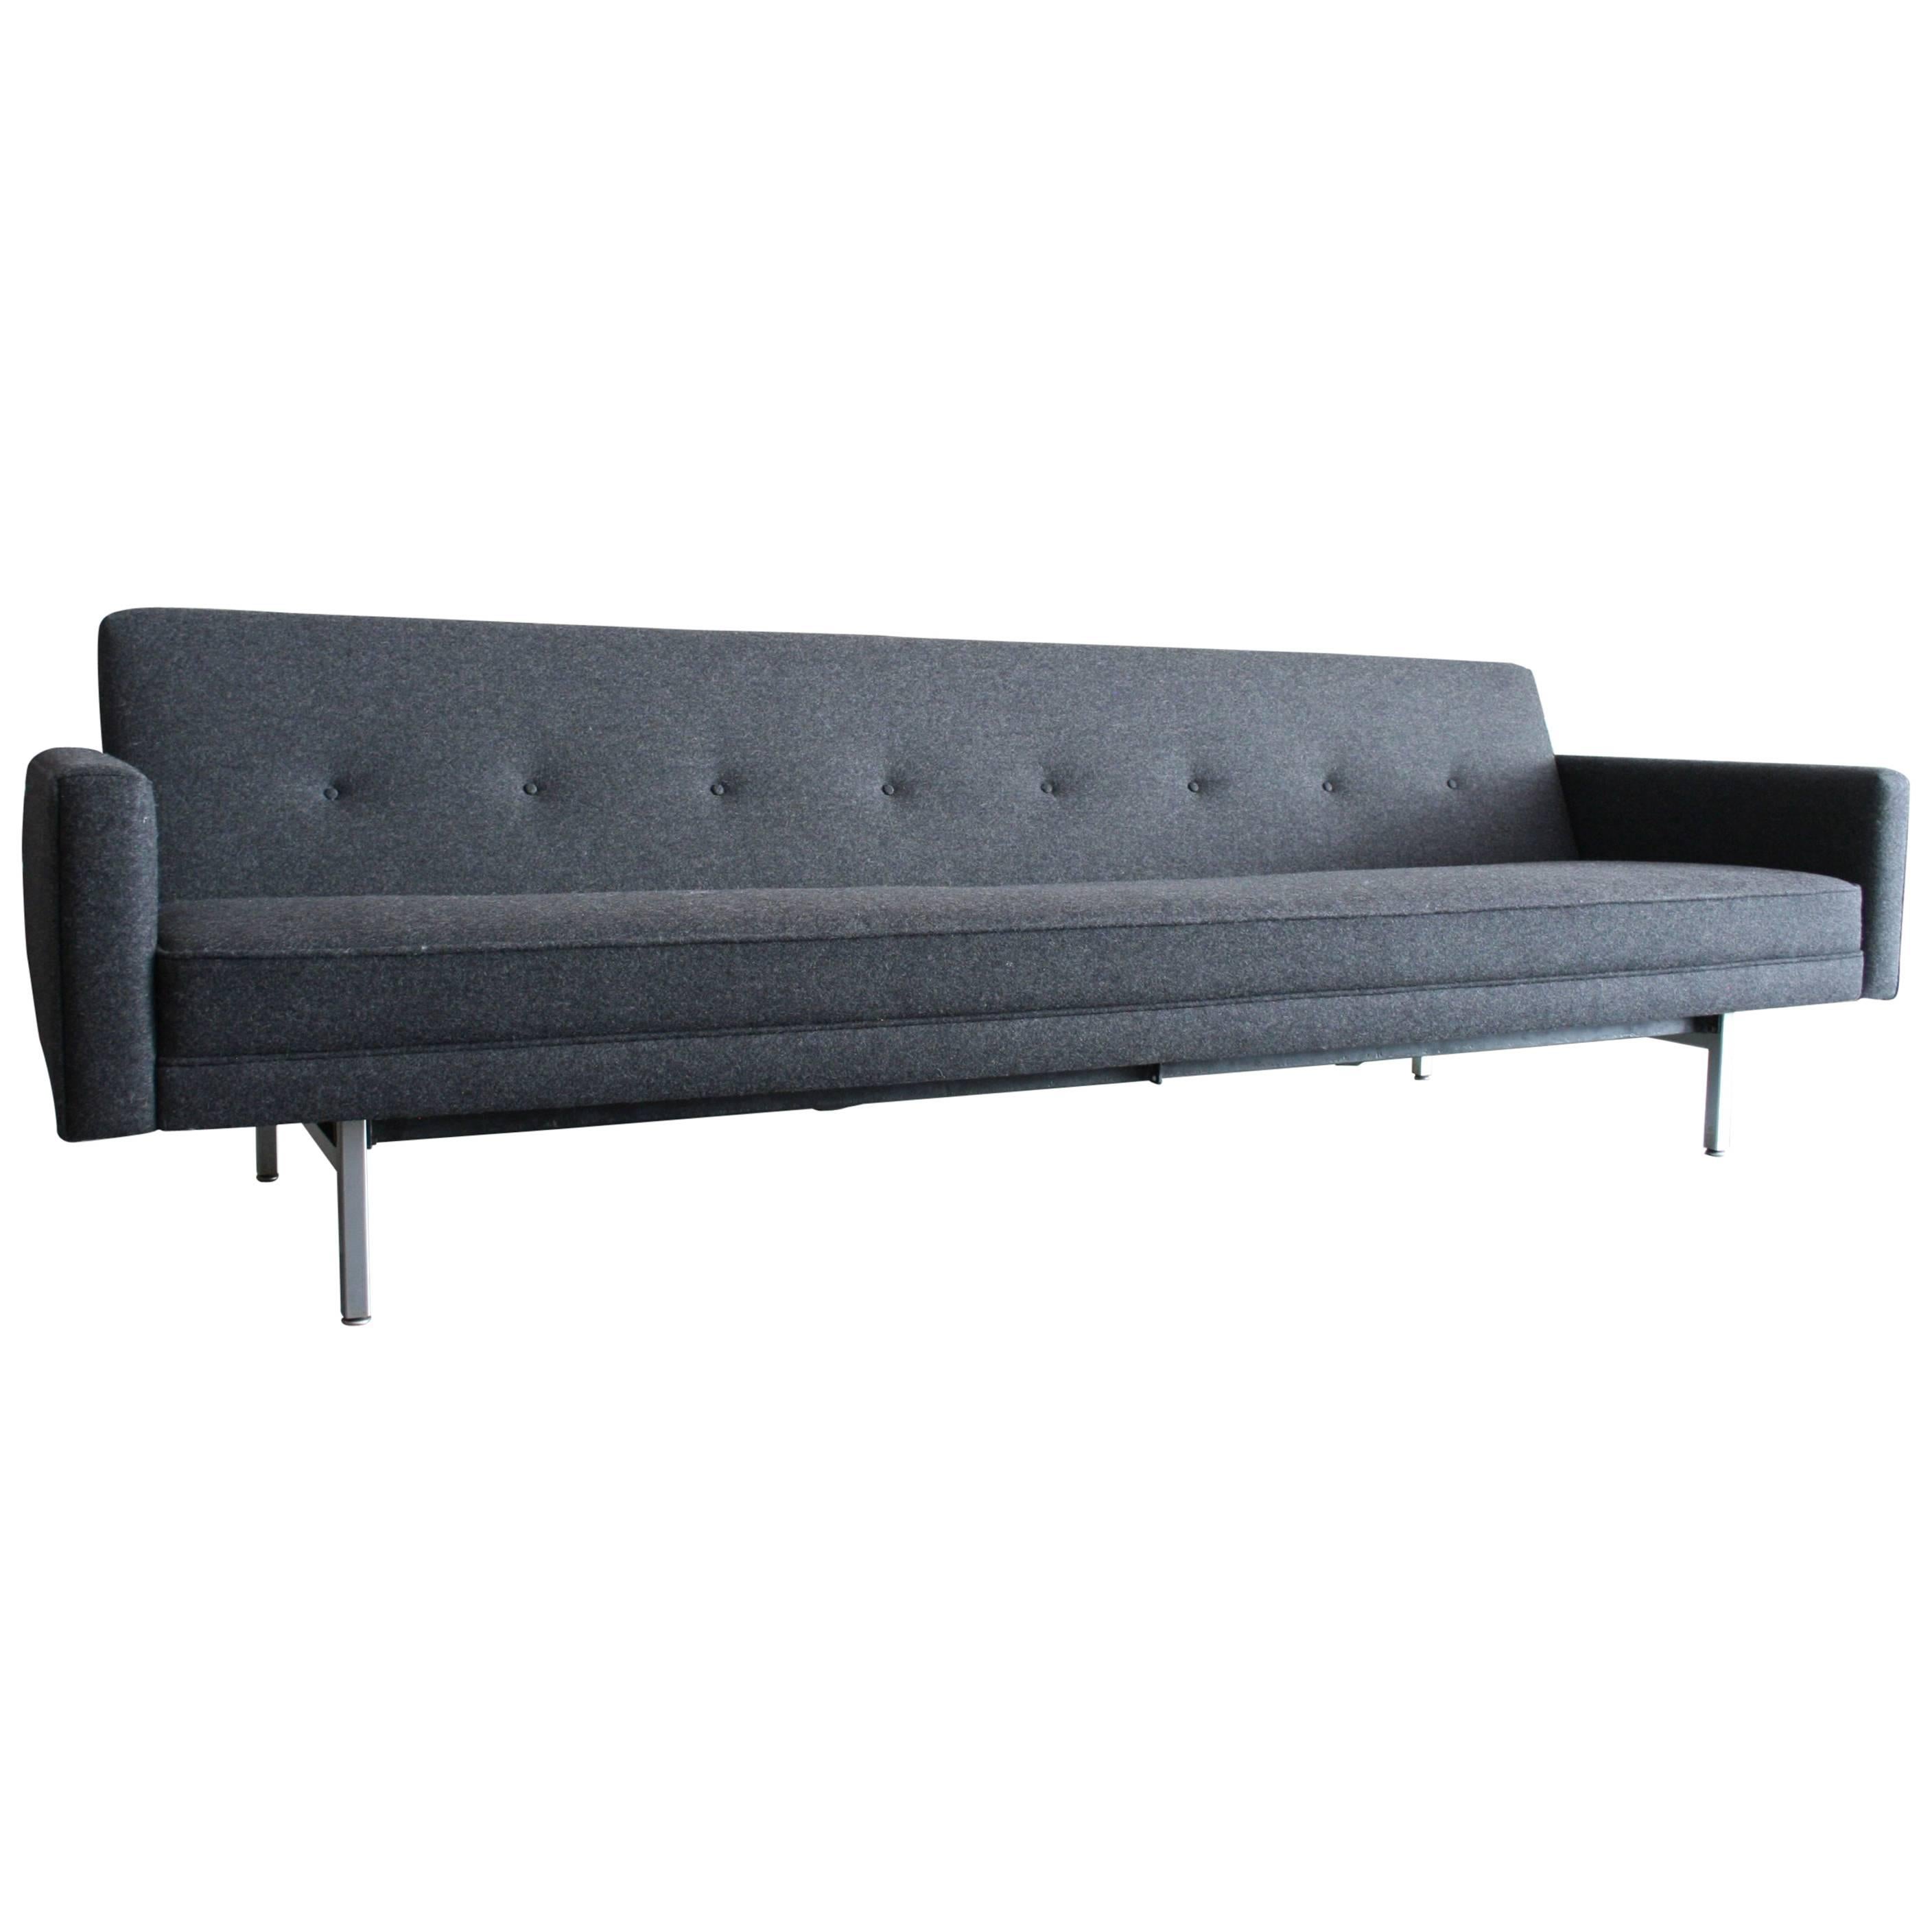 Long Modular Series Sofa by George Nelson for Herman Miller